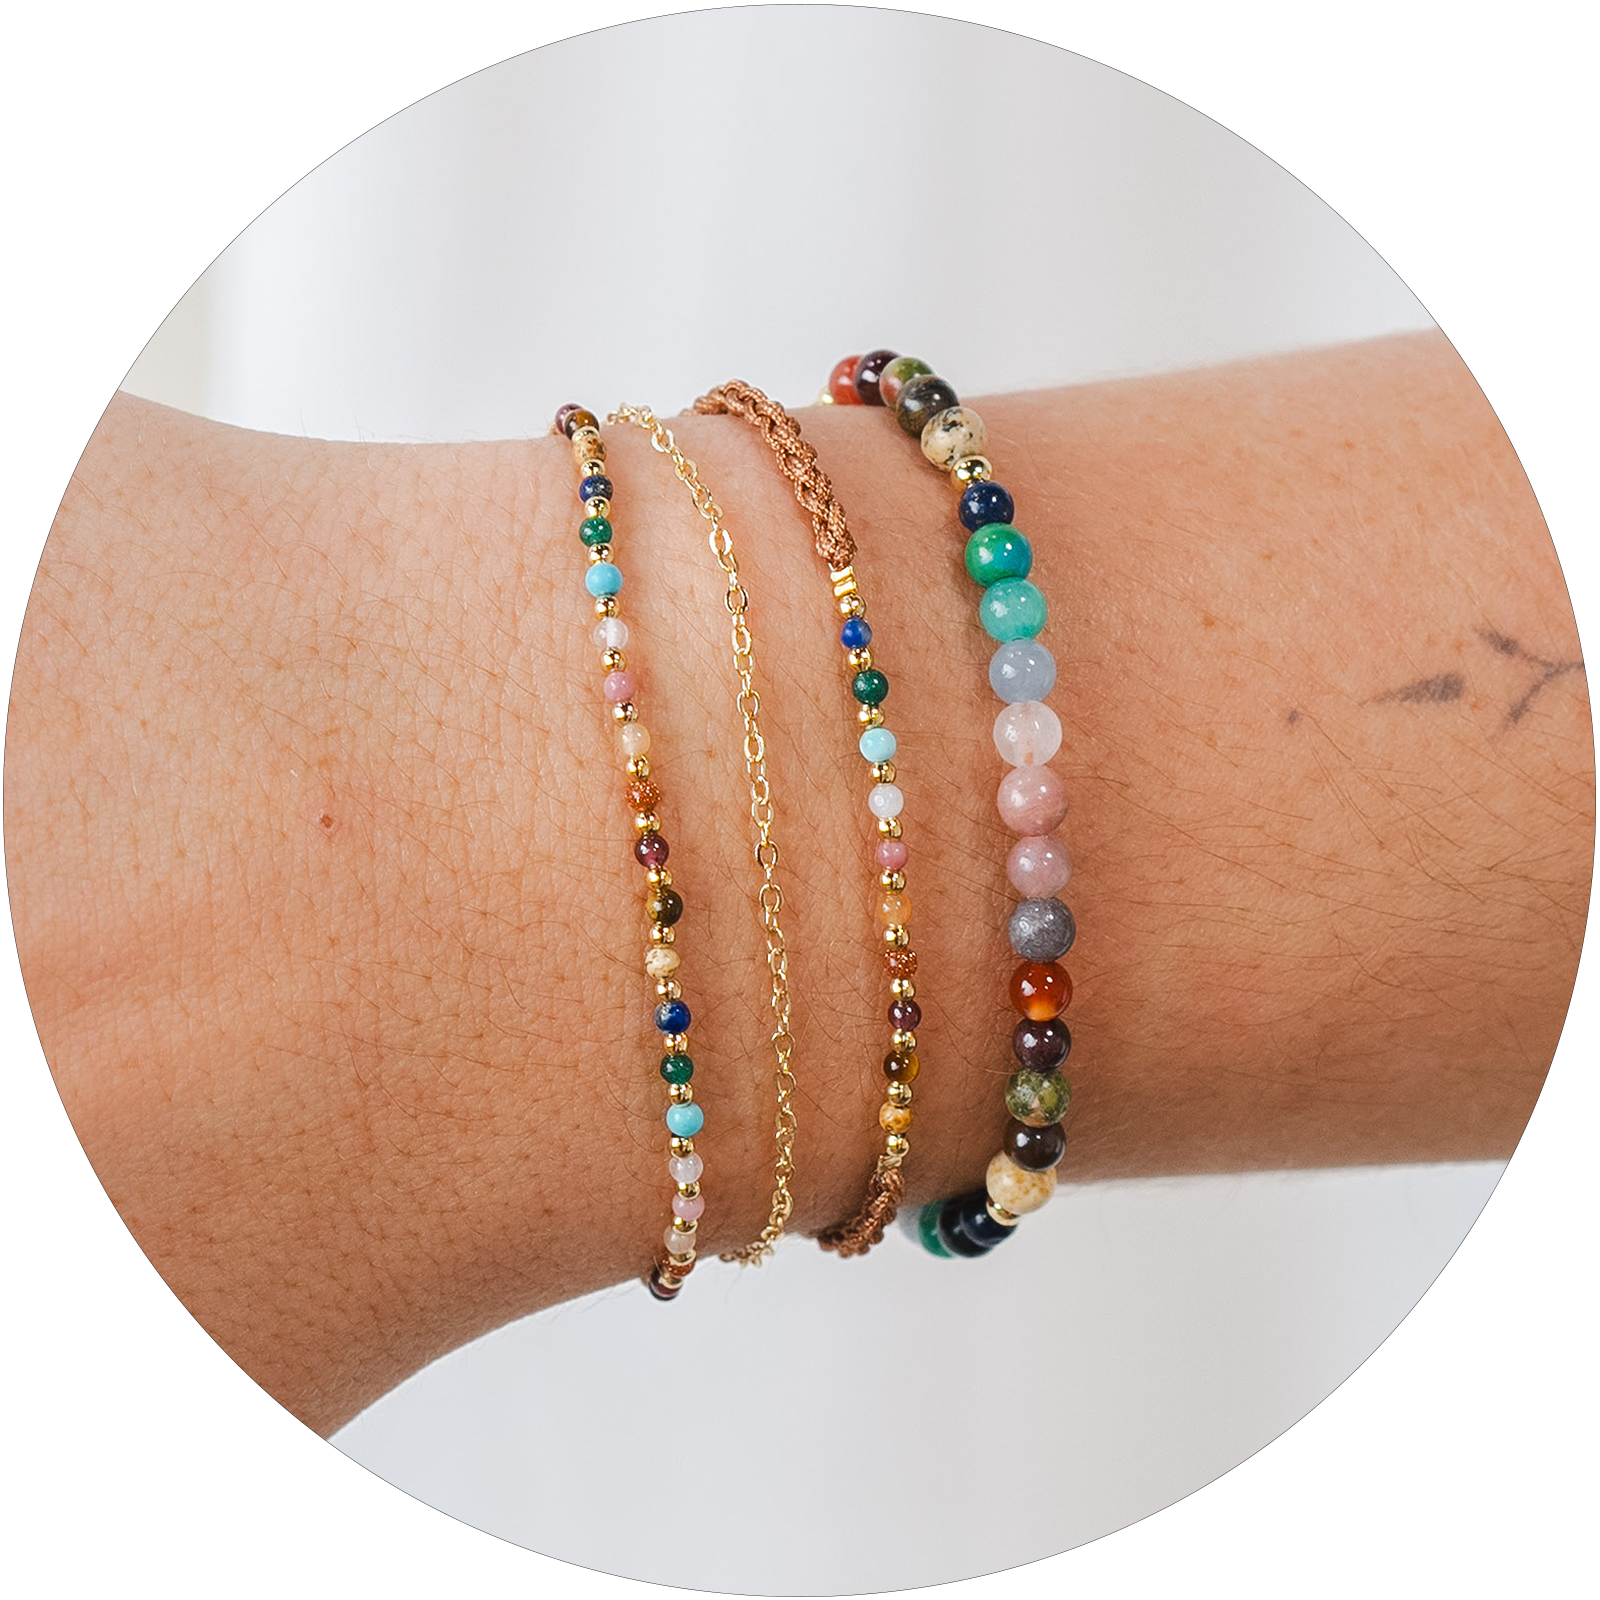 Model wearing a healing bracelet stack. The bracelets include a 2mm multicolor stone and gold bead bracelet with an attached gold chain bracelet, a 2mm multicolor stone and gold bead bracelet on a brown cotton braided cord and a 4mm multicolor stone healing bracelet